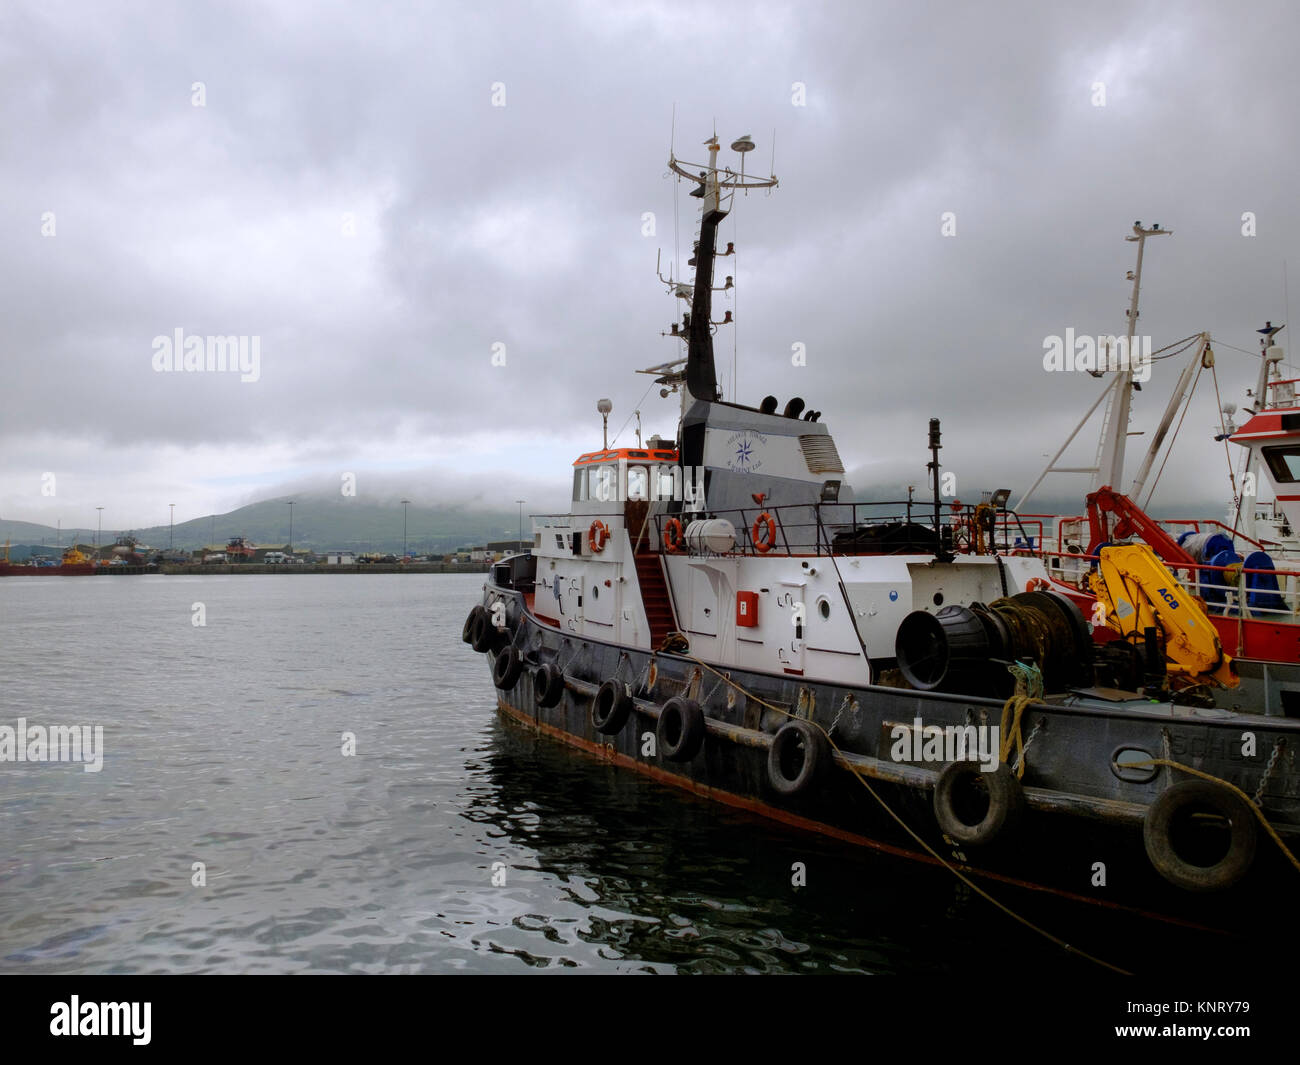 A fishing boat moored at Castletownbere on a wet stormy day, Southern Ireland. Stock Photo